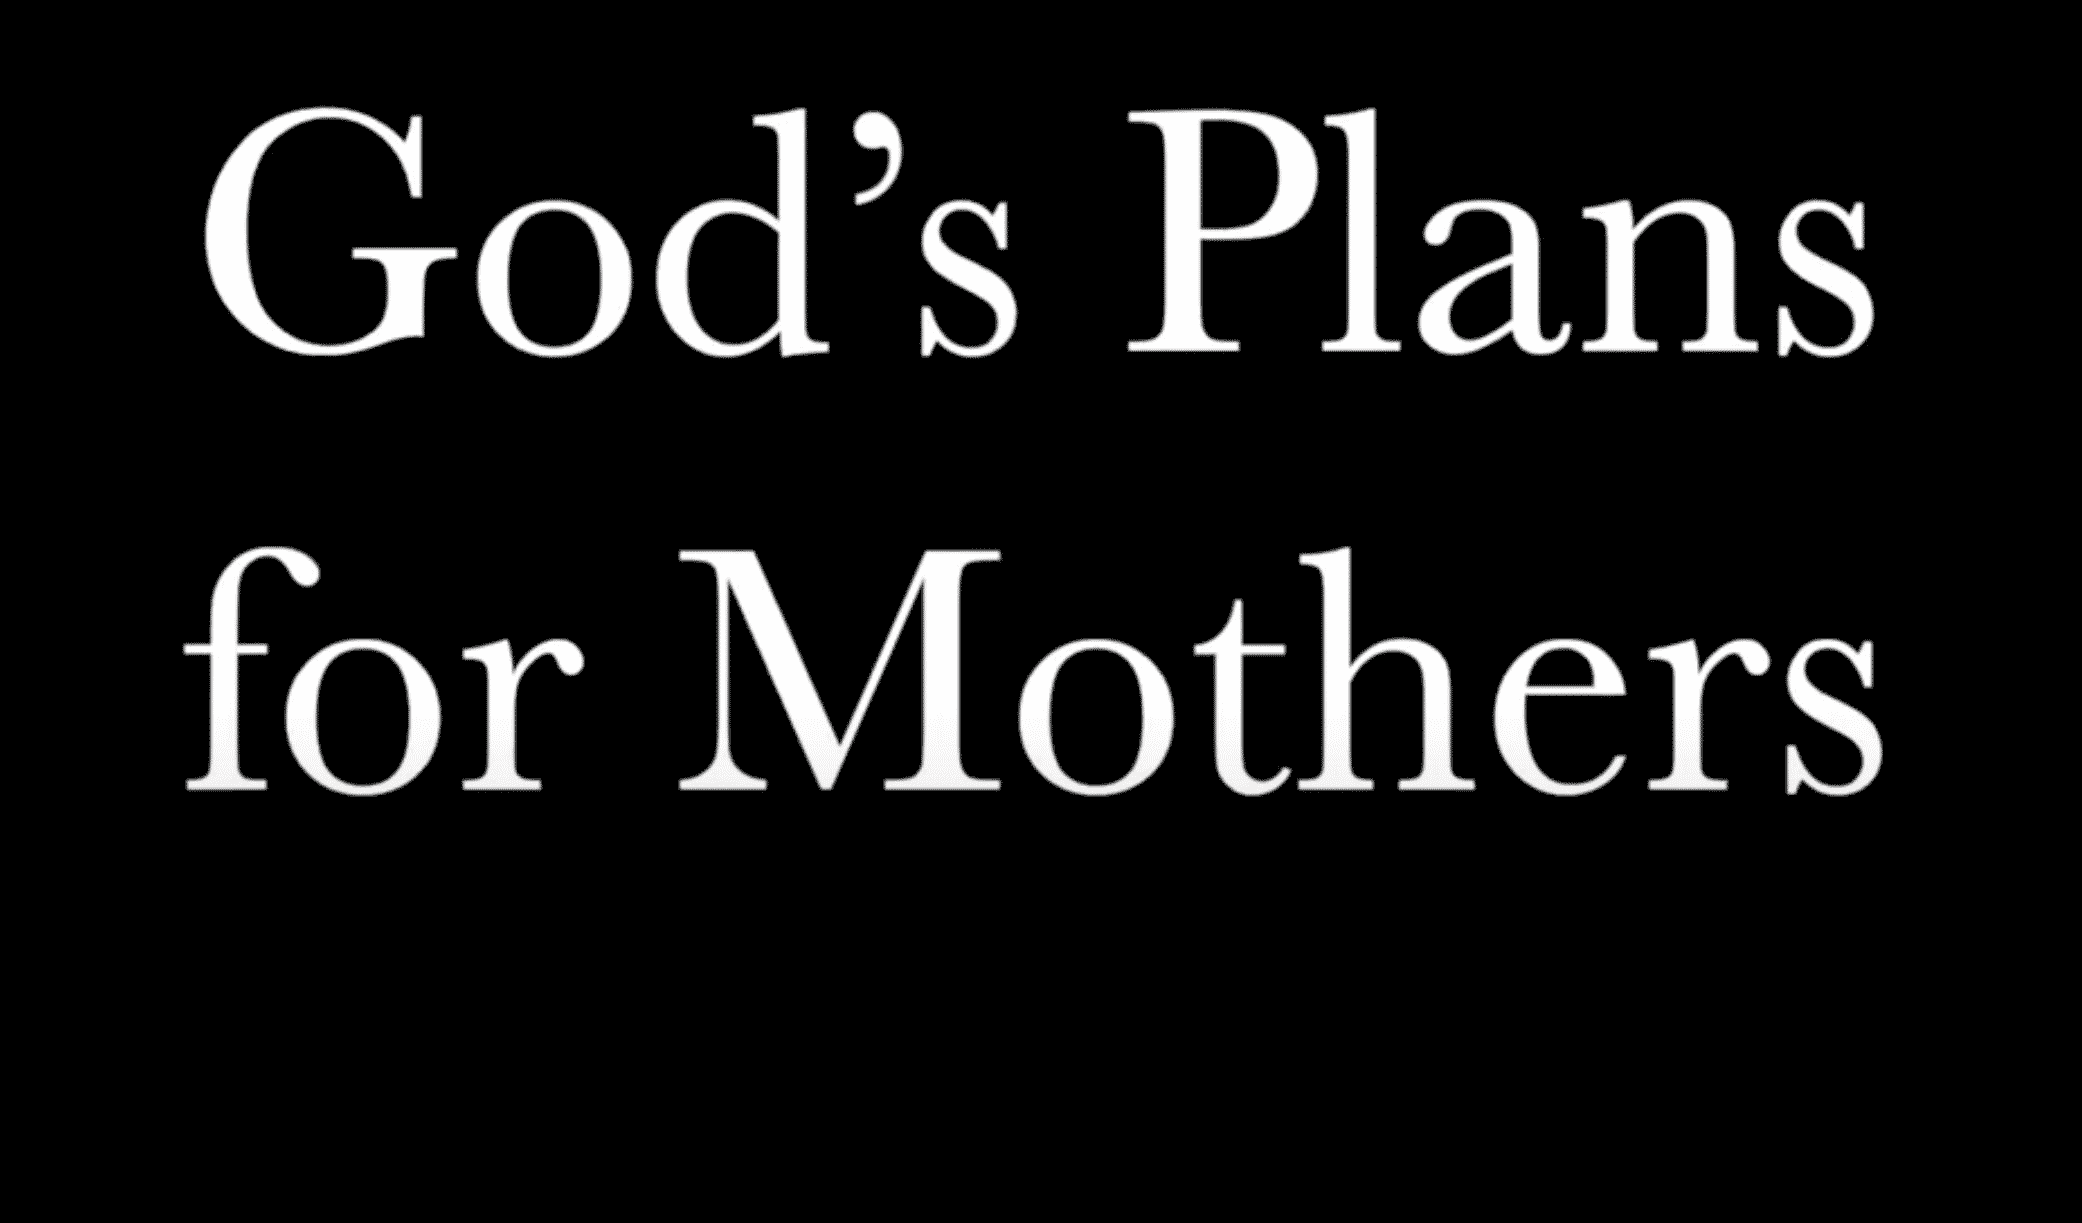 God’s Plans For Mothers